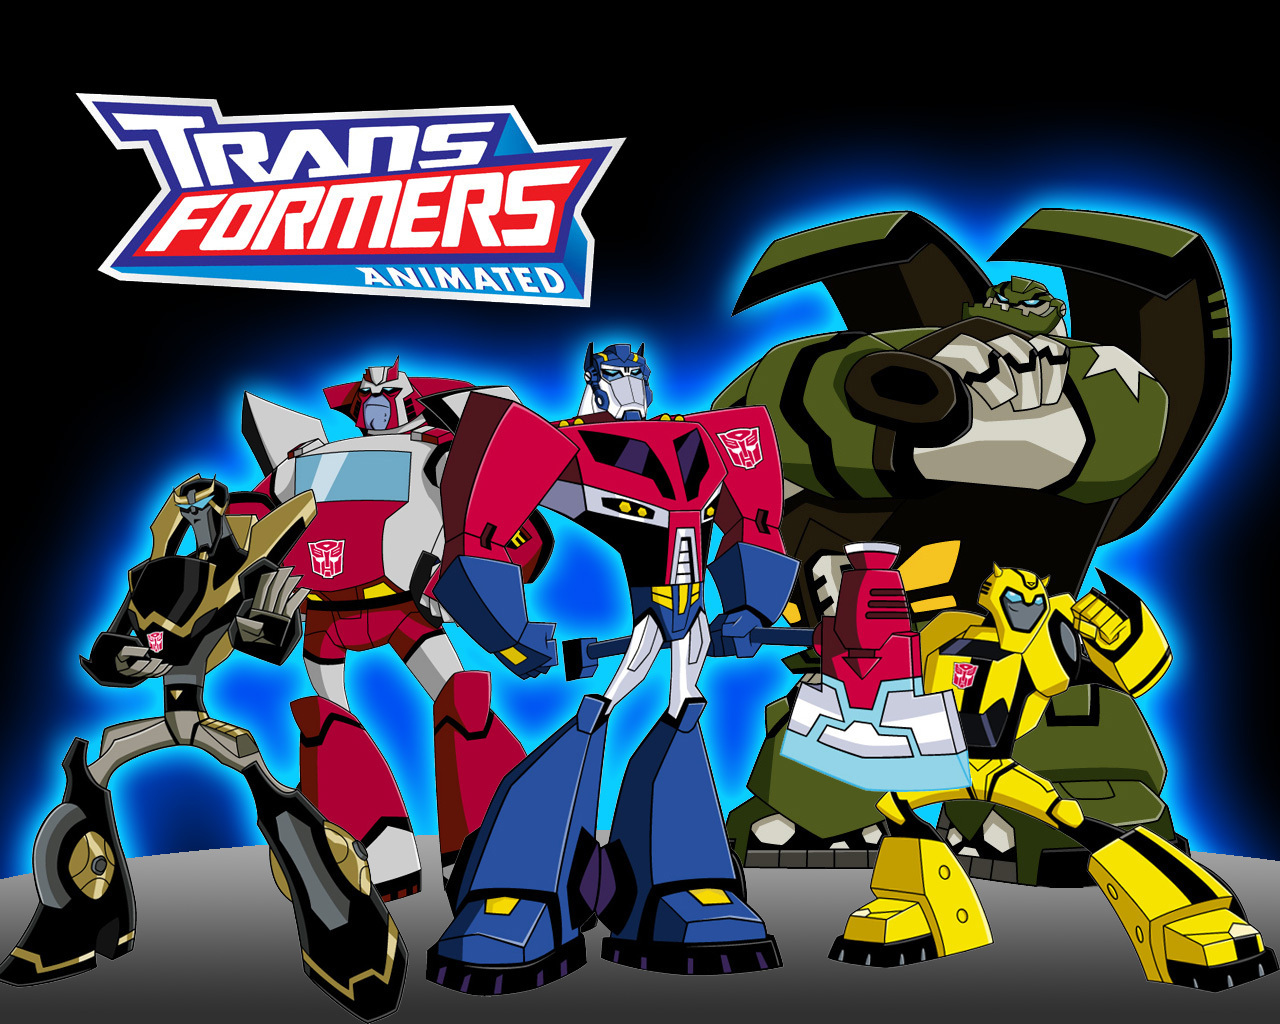 Transformers Animated Film Is An Origin Story Set on Cybertron, Could Start  New Trilogy